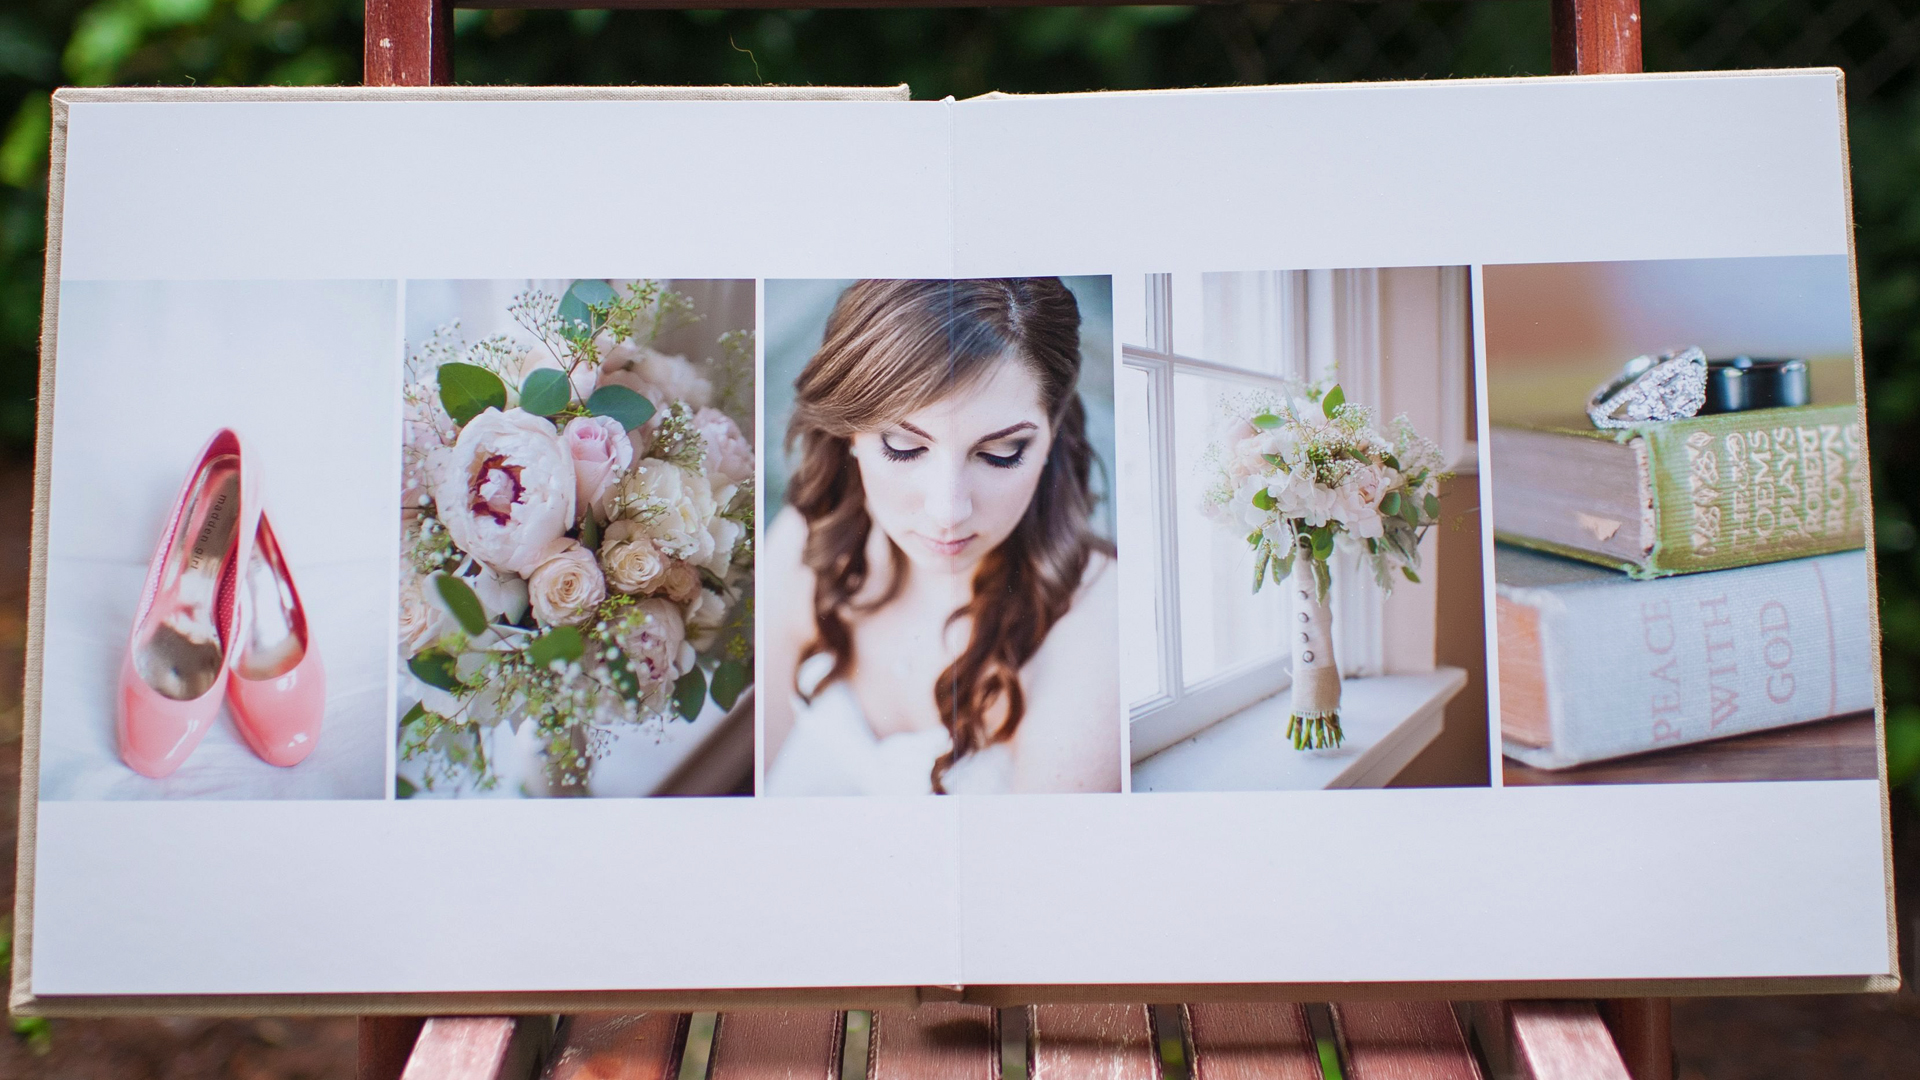 How To Make A Wedding Photo Album - Don't Make Your Wedding Photo Album An Afterthought